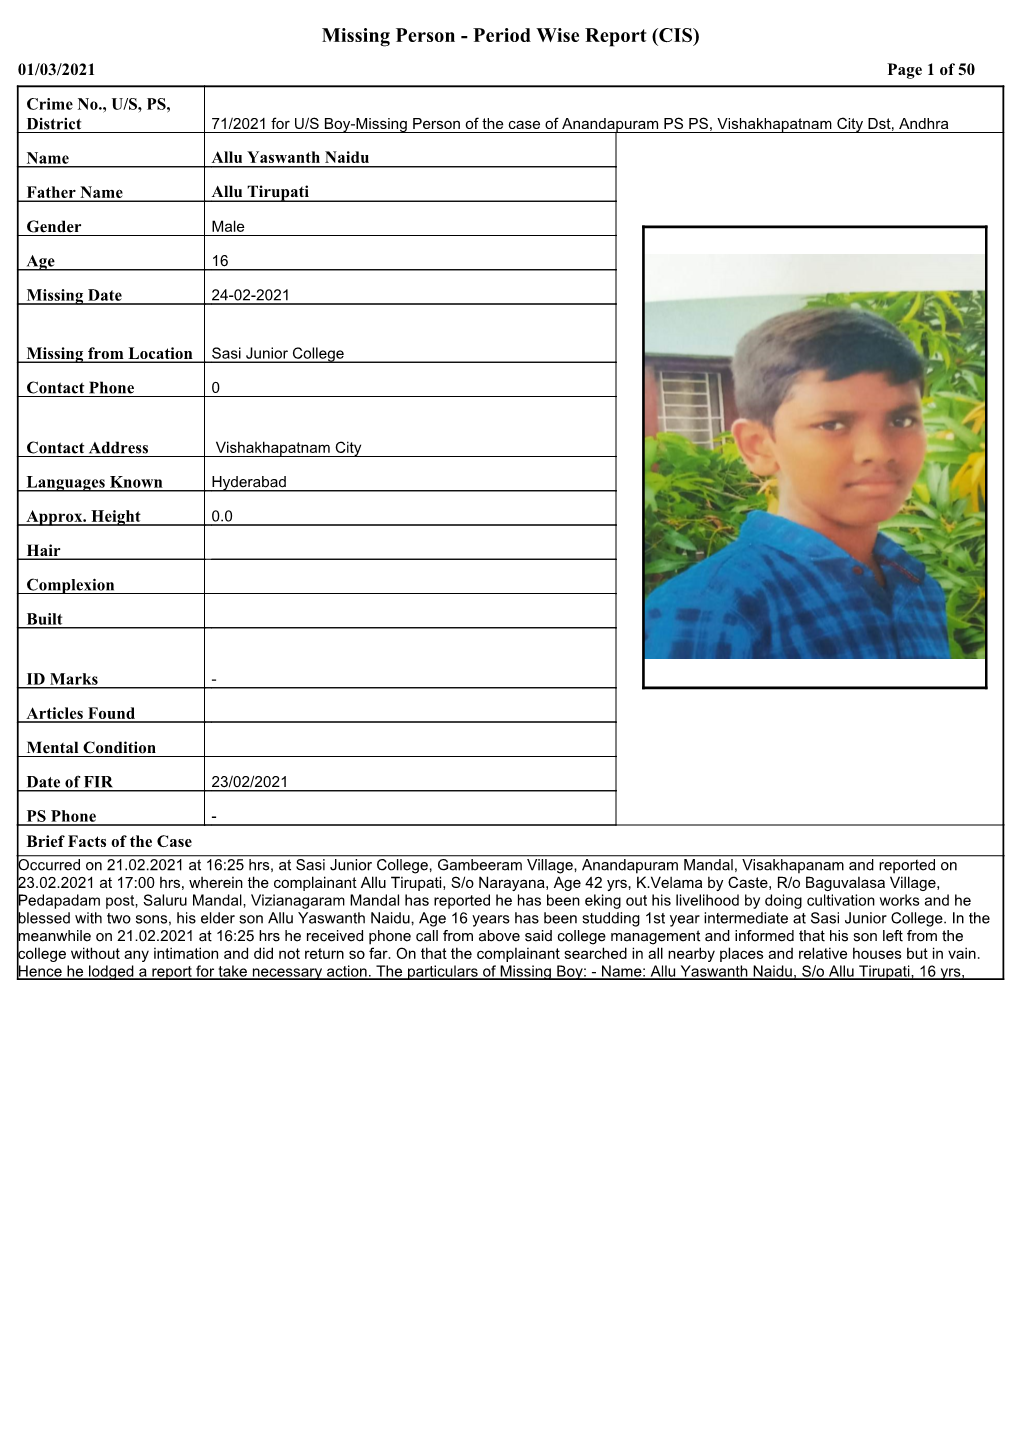 Missing Person - Period Wise Report (CIS) 01/03/2021 Page 1 of 50